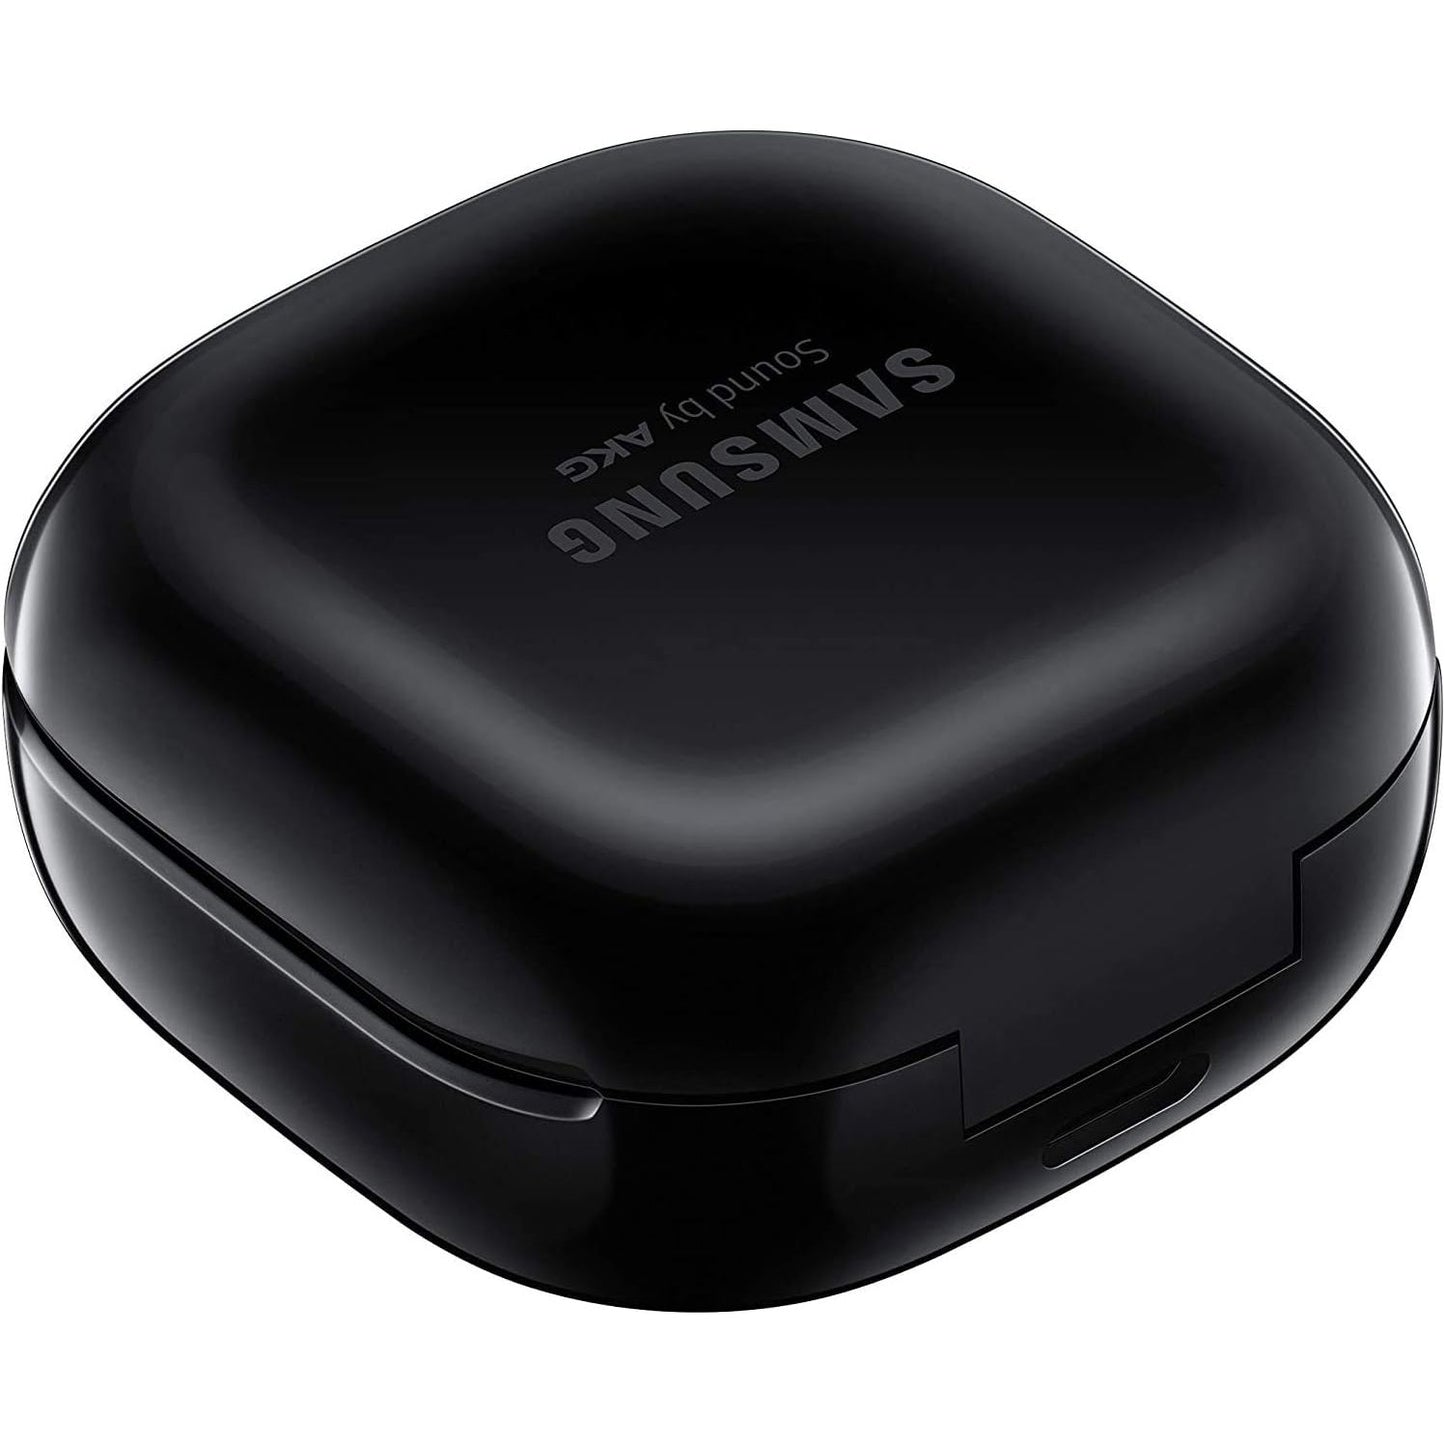 Samsung Galaxy Buds Live, Wireless Bluetooth Headphones with Noise Cancelling (ANC), Comfortable Fit, Long Lasting Battery, Wireless Headphones in Mystic Black